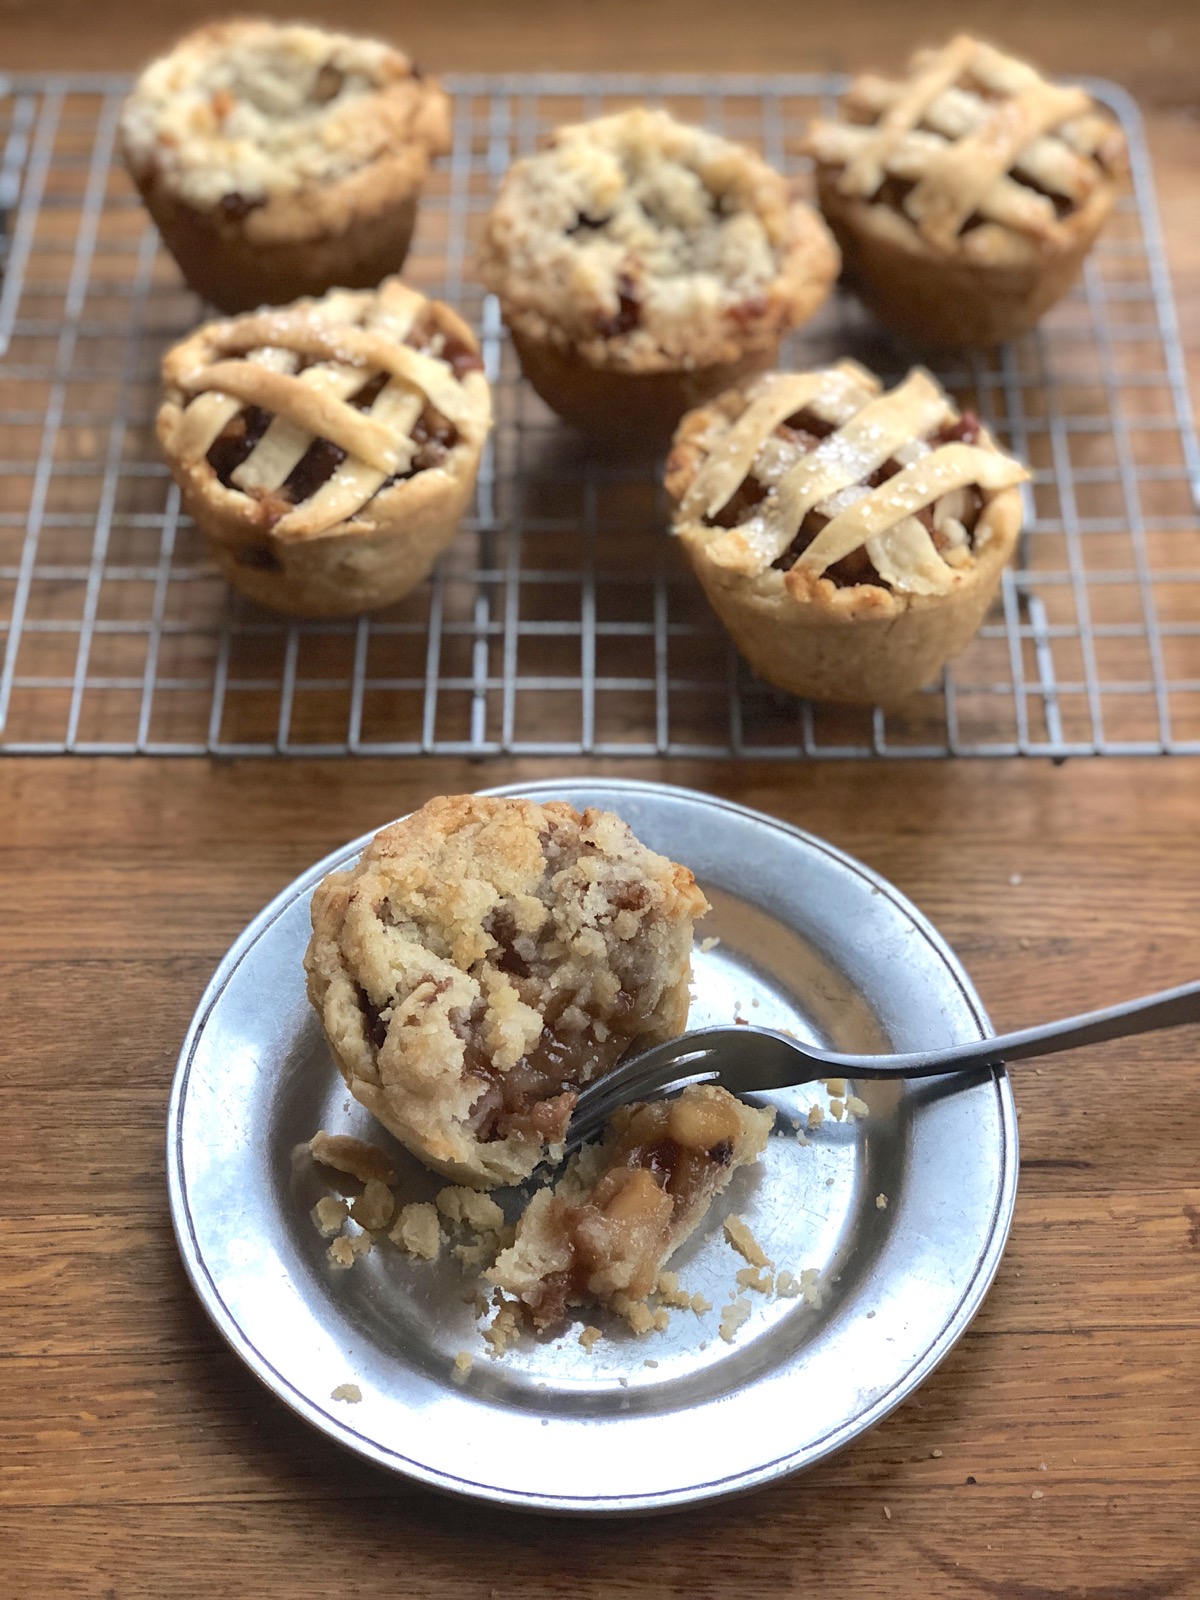 Apple mini pie on a plate with a fork, cut open, more mini pies in the background on a cooling rack.